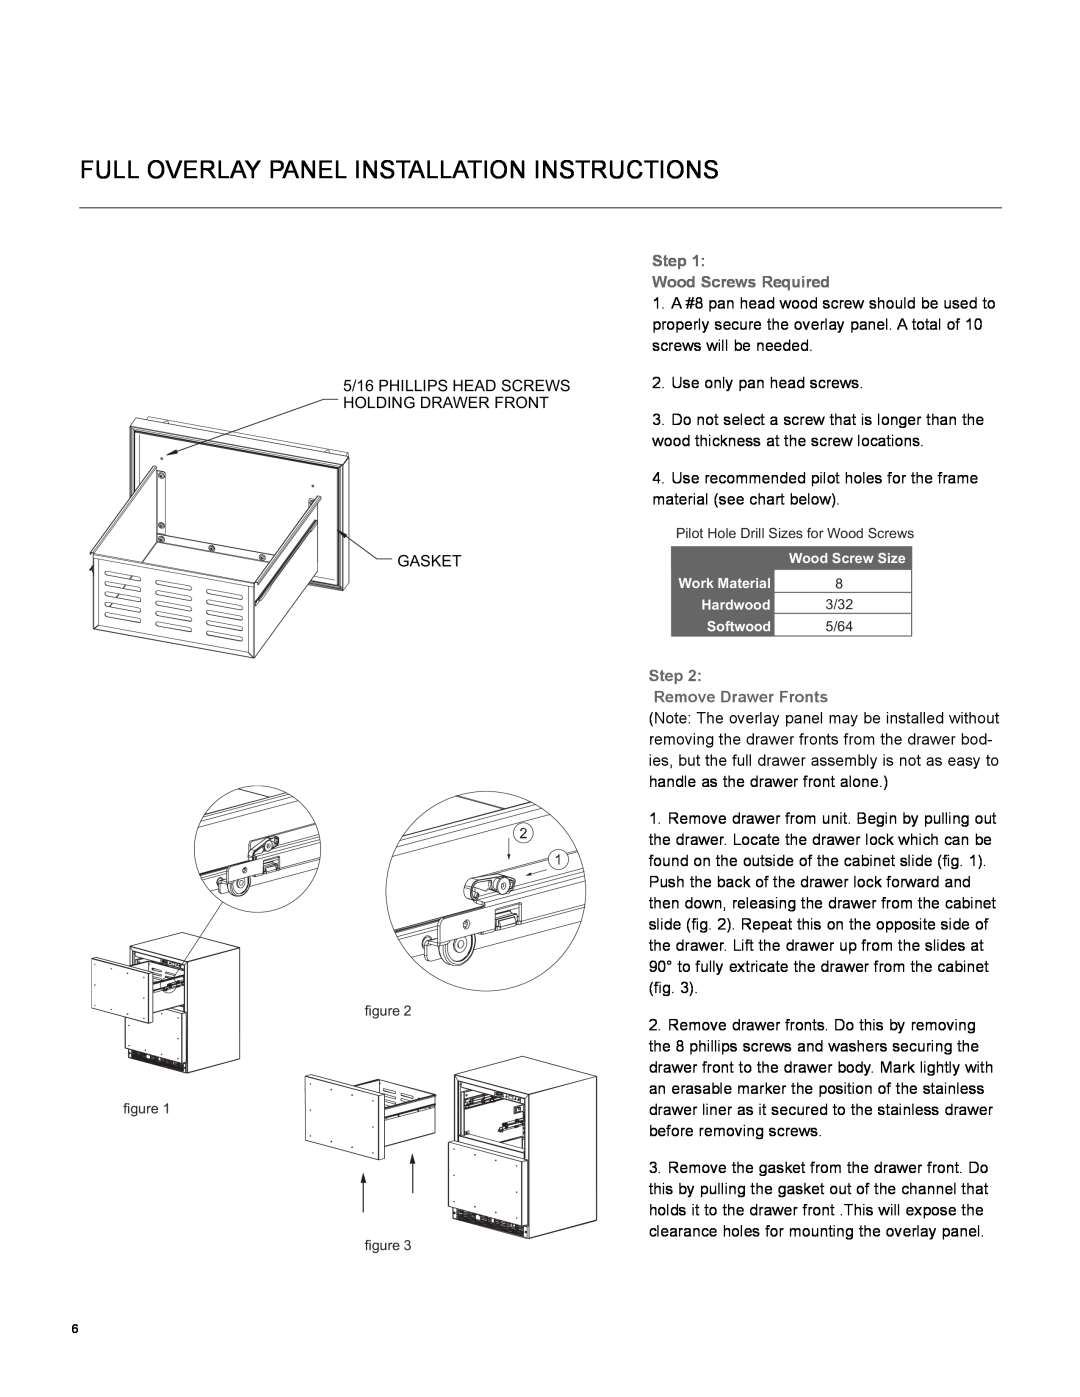 Marvel Industries 80RD Full Overlay Panel Installation Instructions, Step Wood Screws Required, Step Remove Drawer Fronts 